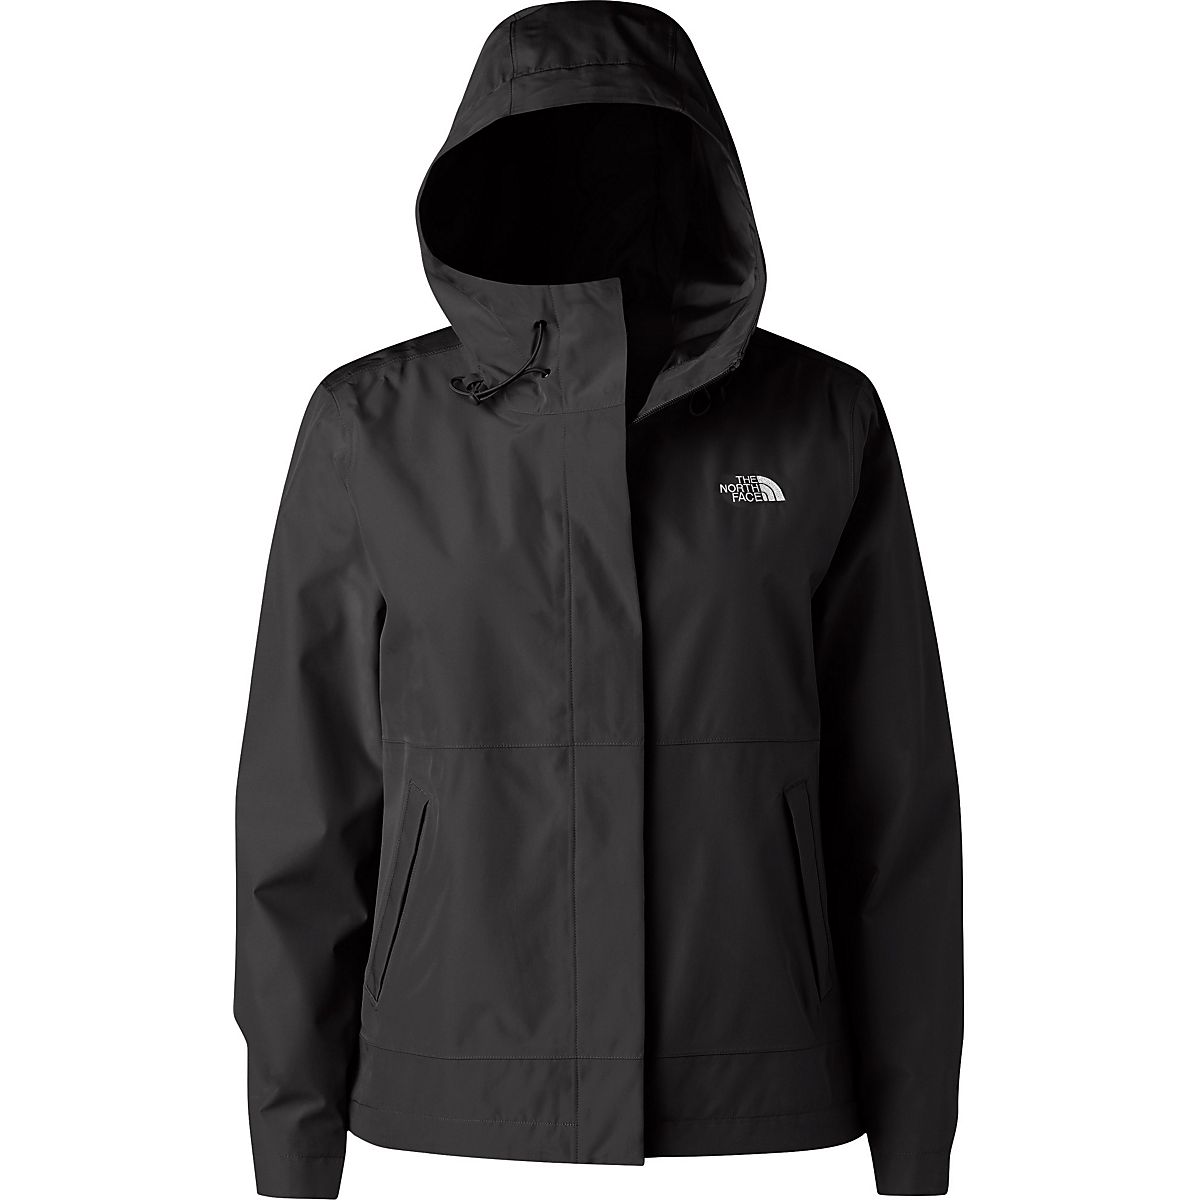 The North Face Women's Woodmont Jacket | Academy